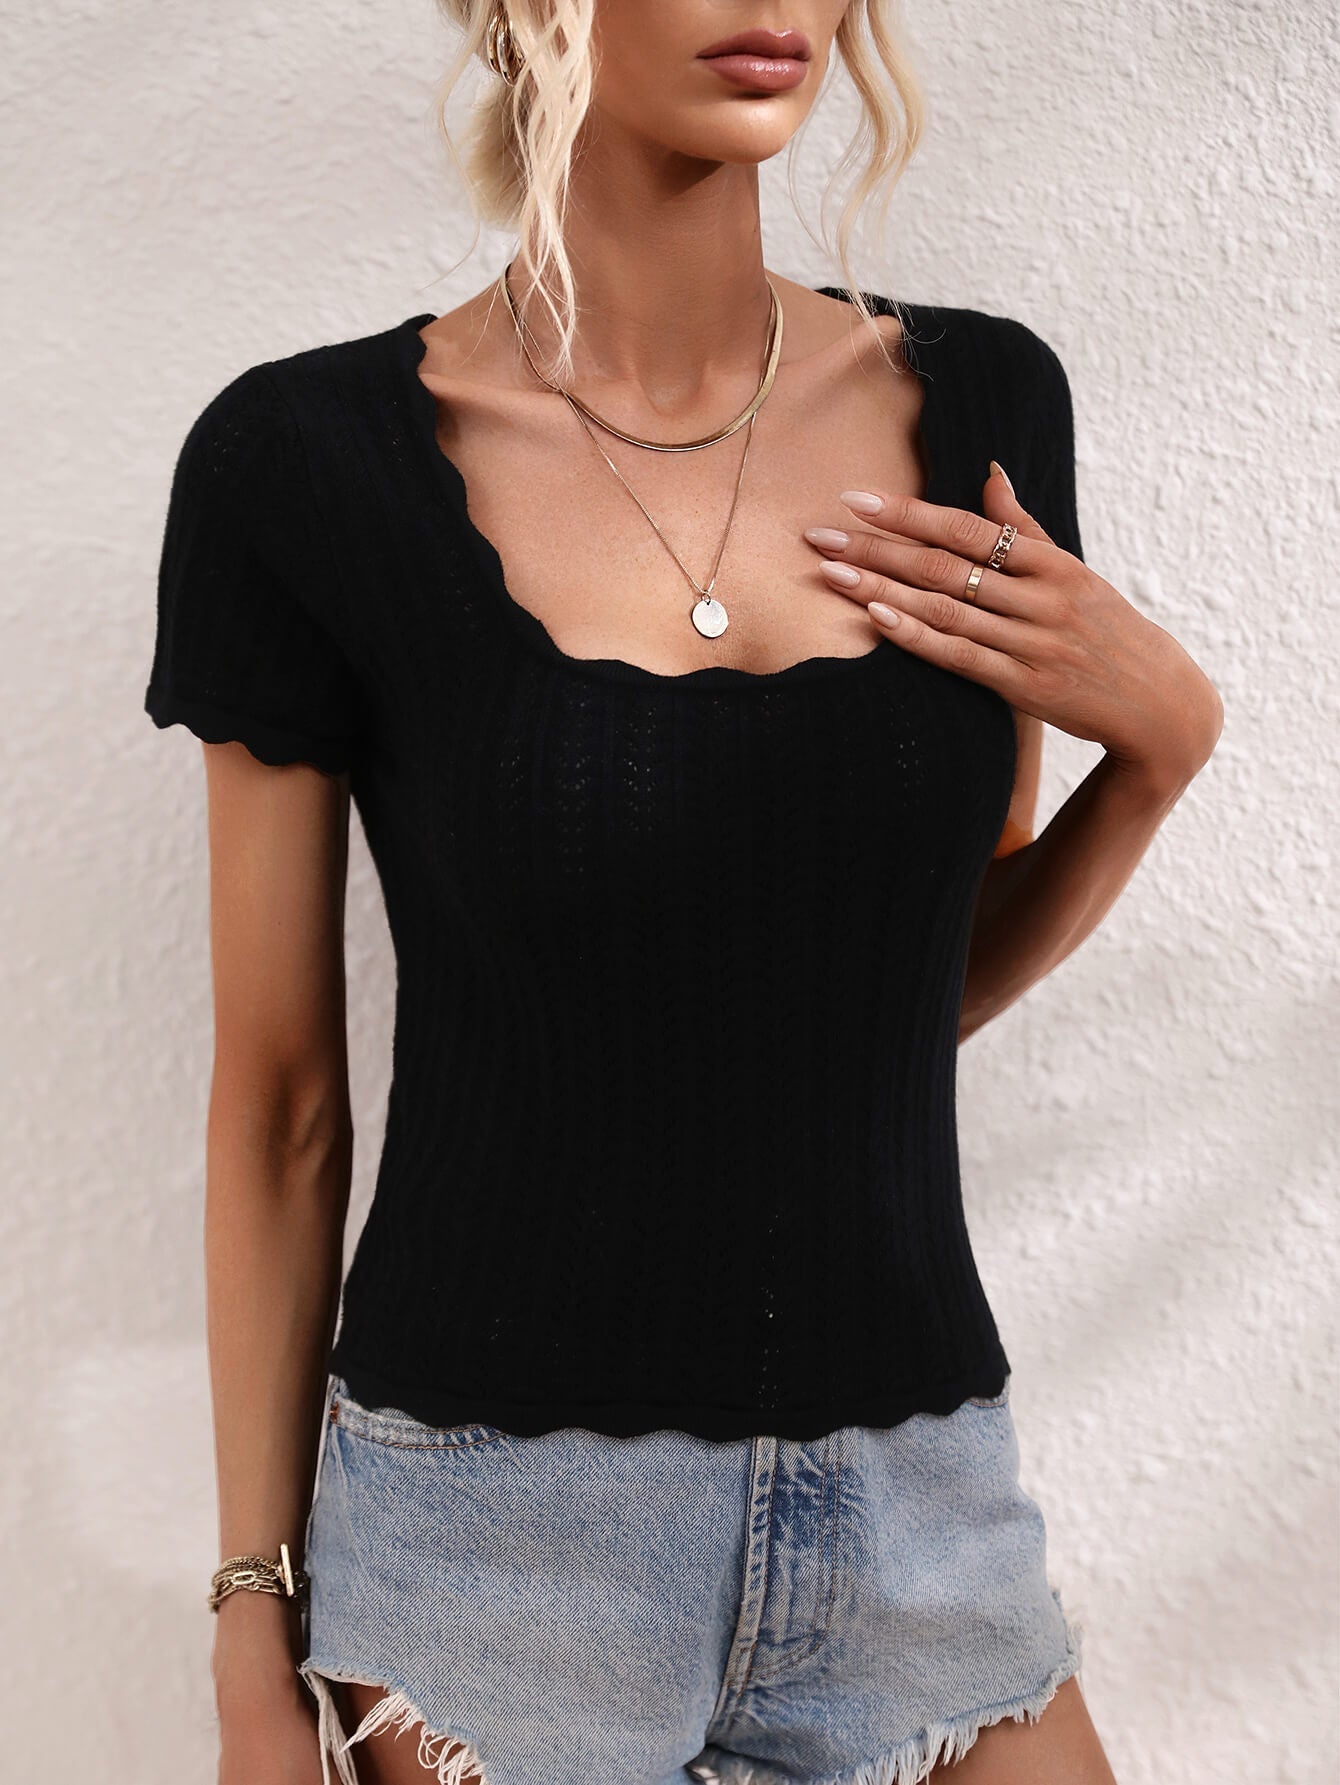 Enchanted Love Scalloped Hem Square Neck Knit Top - Indulge in the Romance of Delightful Elegance - Flatter and Accentuate Your Every Curve with Comfort. - Guy Christopher